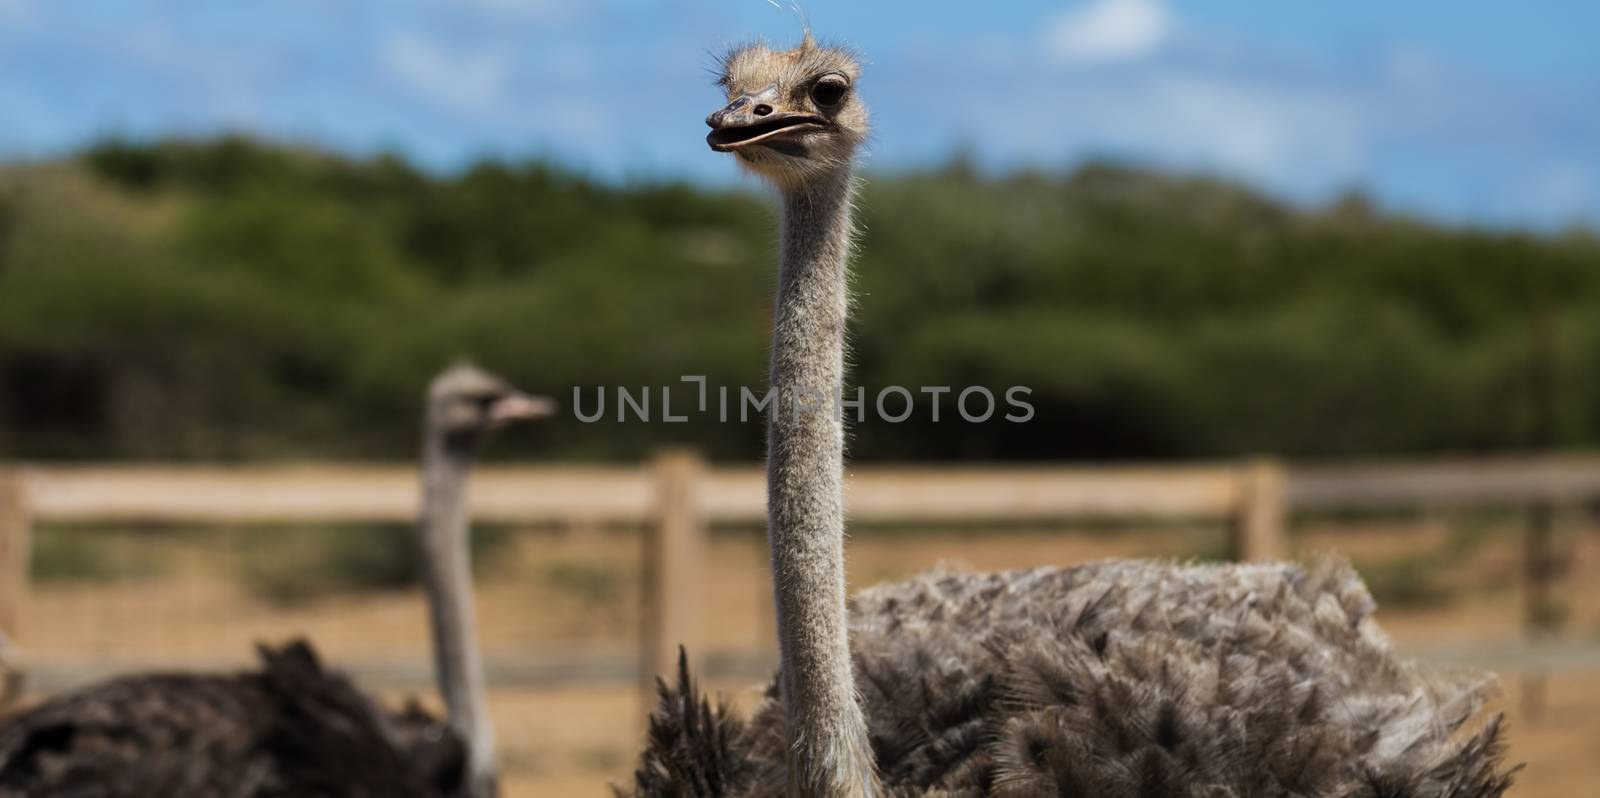 Ostriches curiously looking in opposite directions. Blue sky and trees in the blurred background